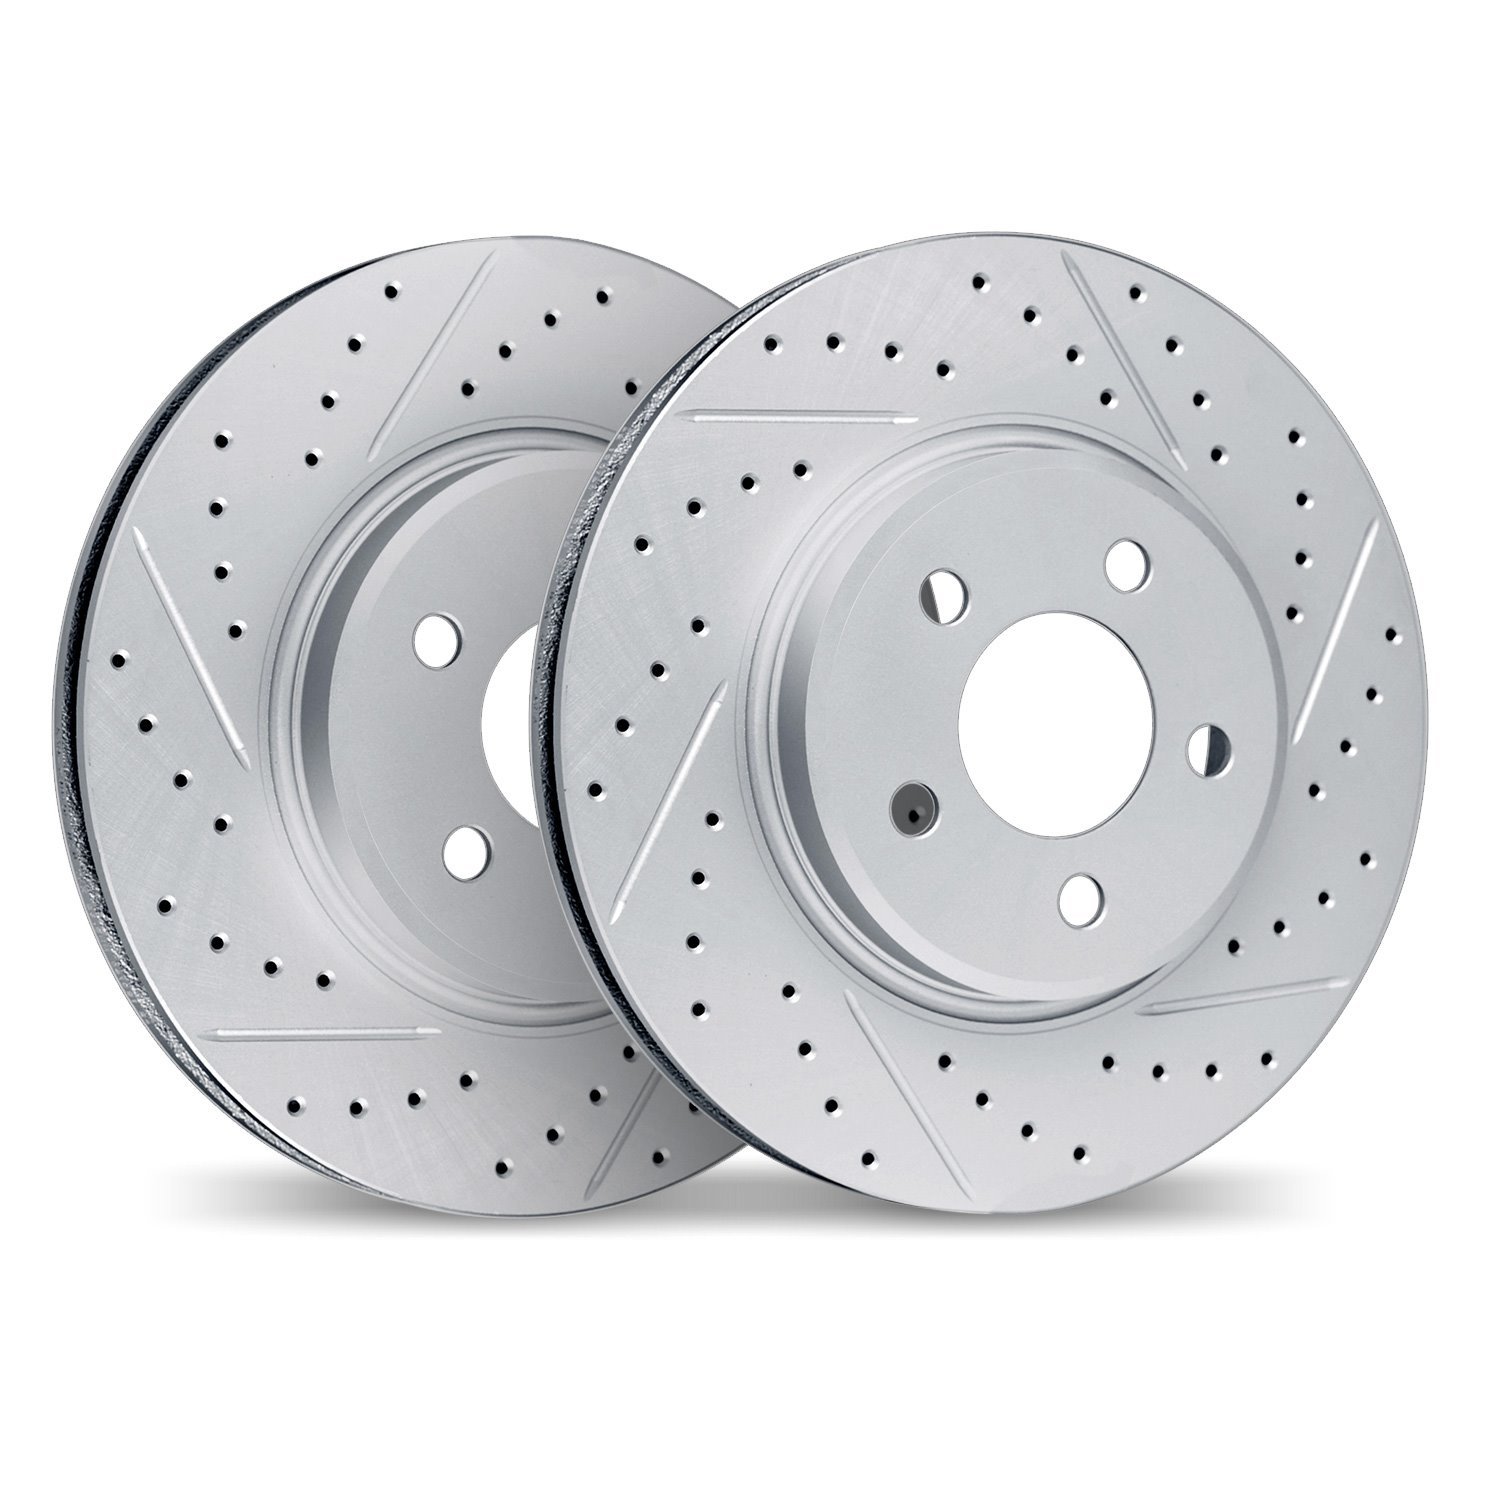 2002-79006 Geoperformance Drilled/Slotted Brake Rotors, Fits Select Maserati, Position: Rear